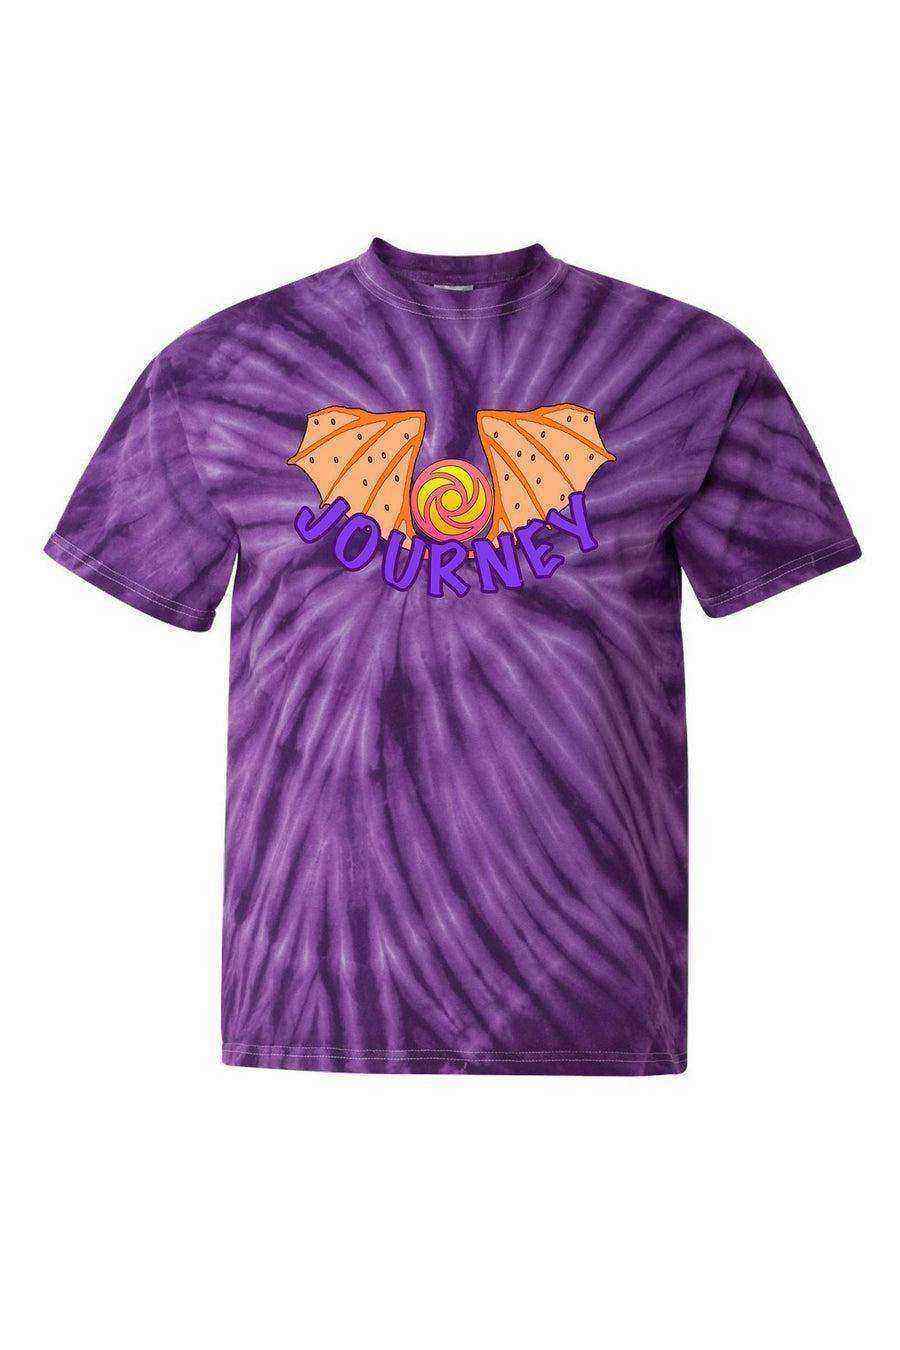 Youth | Figment Band Tie-Dye Tee | Journey Shirt - Dylan's Tees